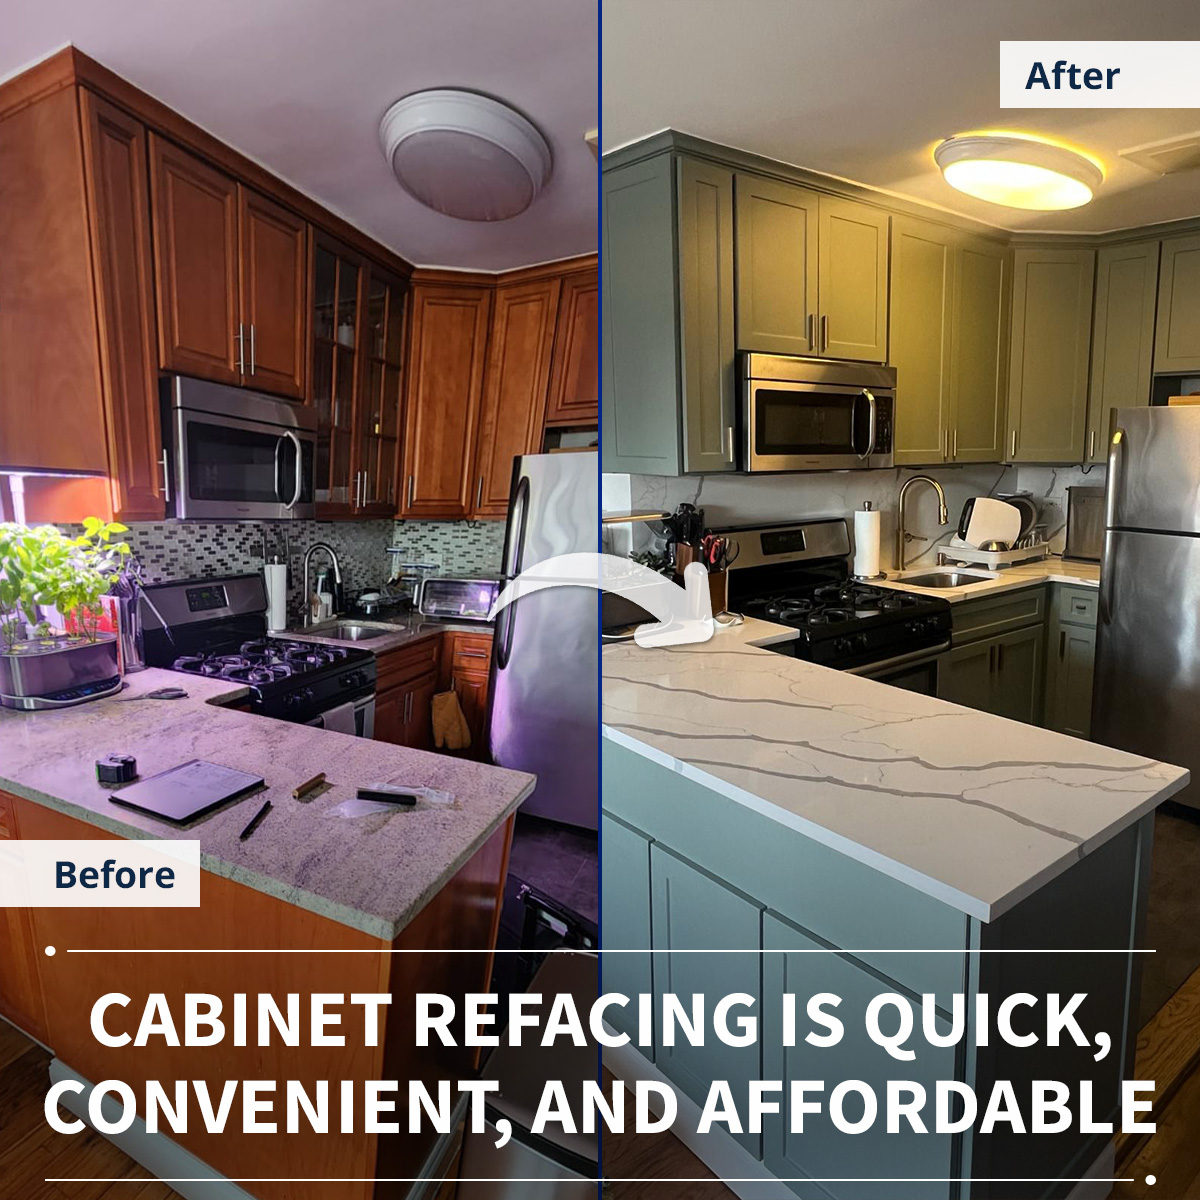 Cabinet Refacing is quick, convenient, and affordable